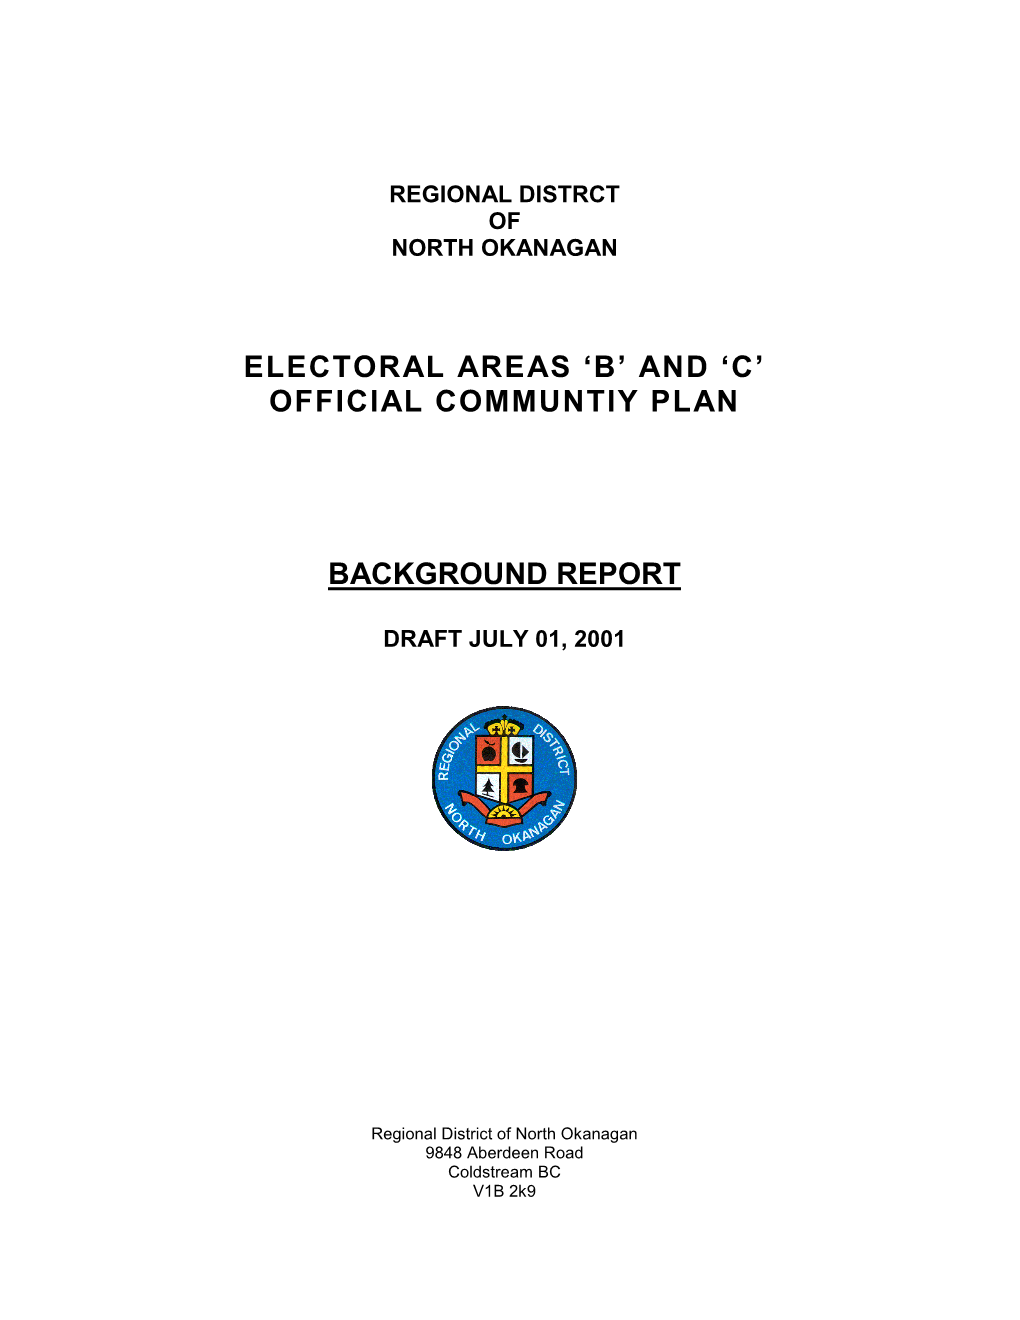 Electoral Areas ‘B’ and ‘C’ Official Communtiy Plan